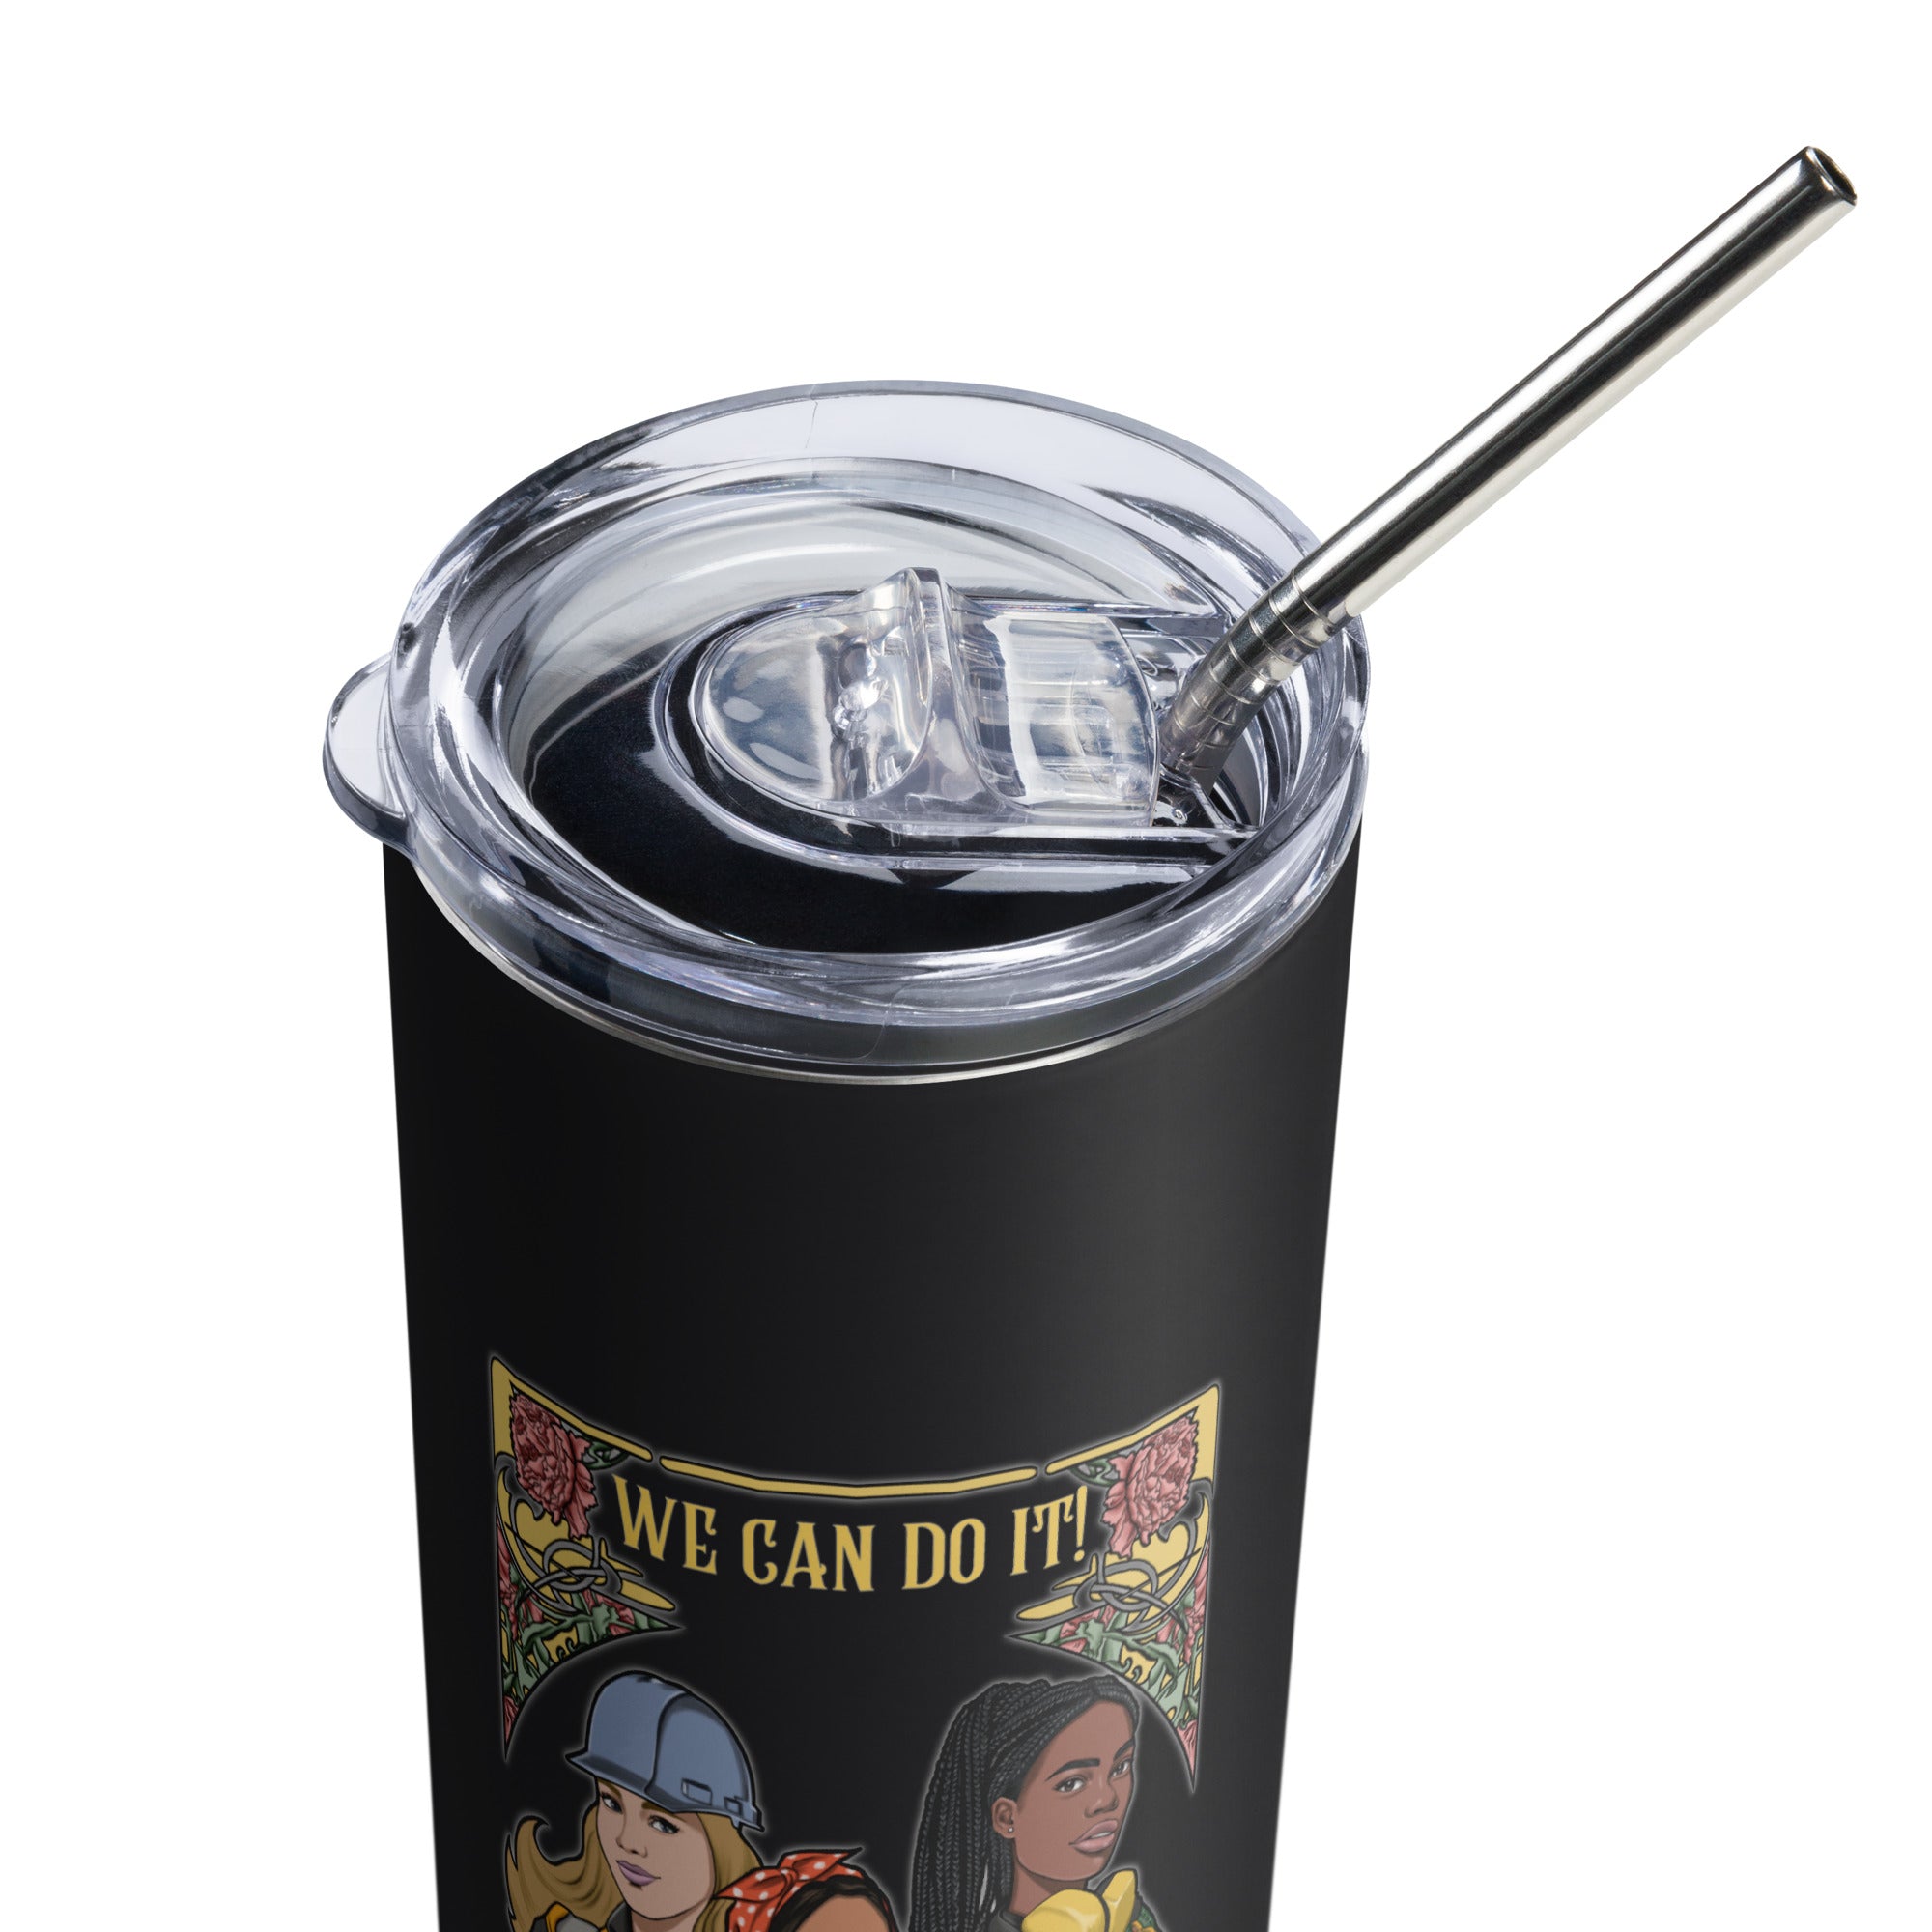 We Can Do It! Women in Industry© Stainless Steel Tumbler in Black